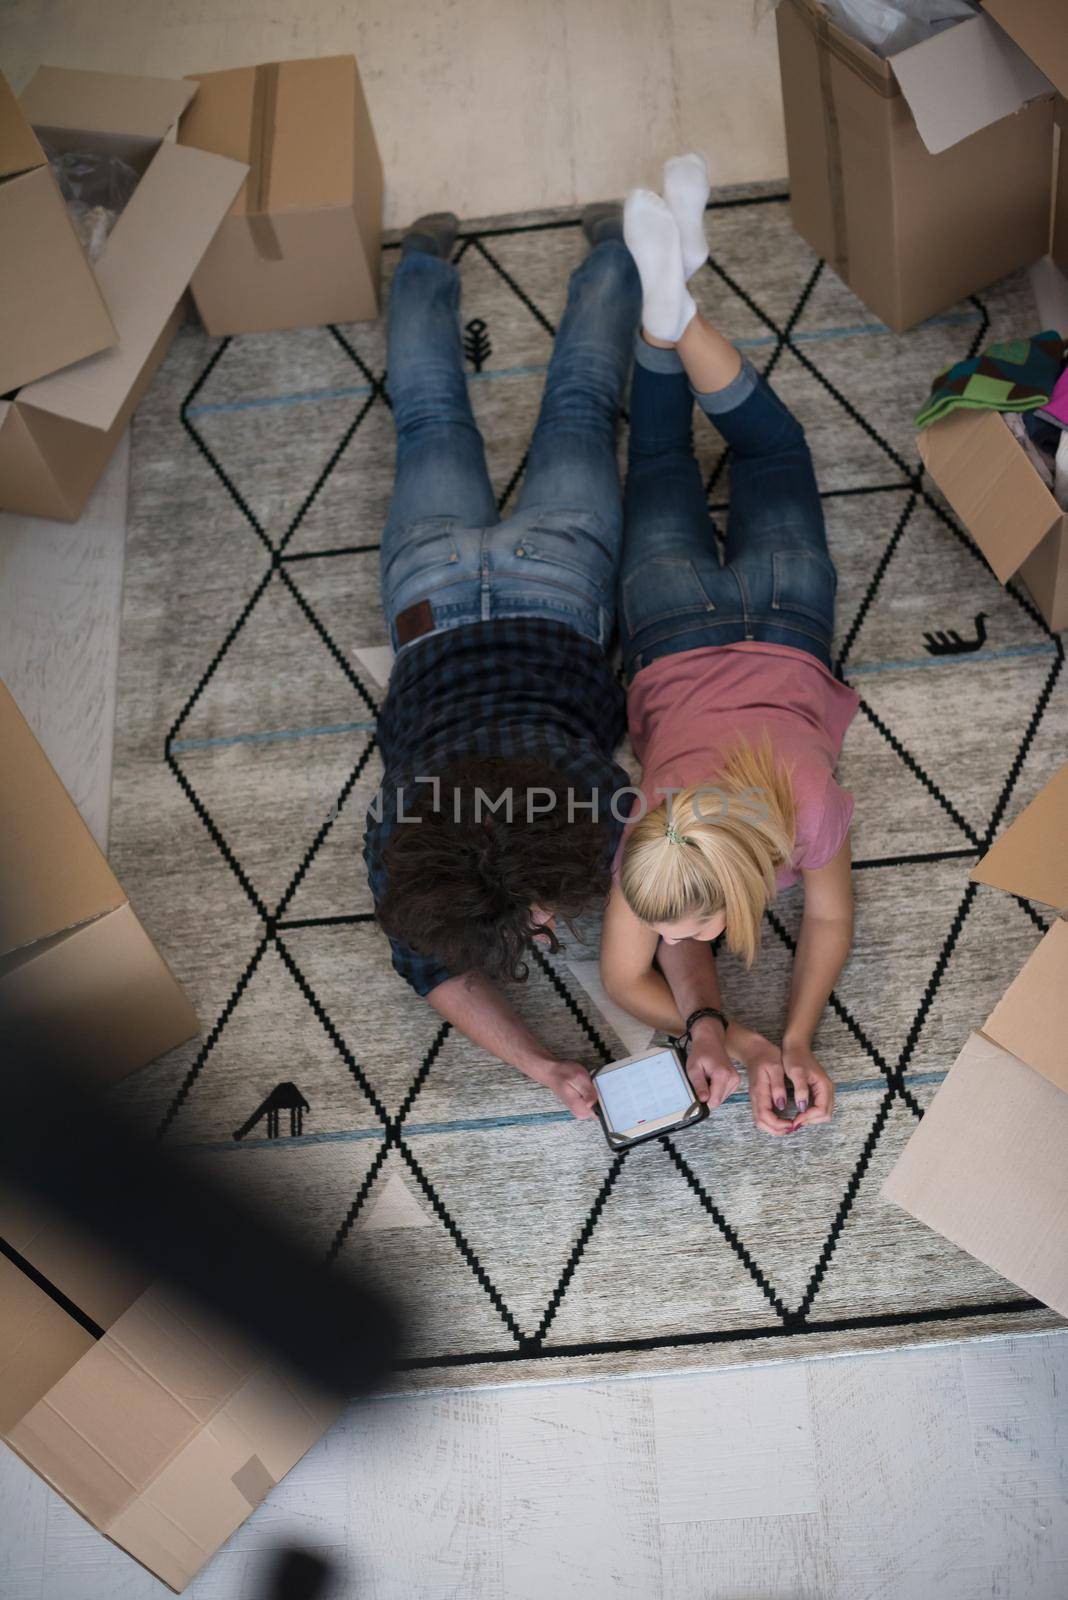 Top view of attractive young couple moving, holding hands, looking at camera and smiling while lying among cardboard boxes